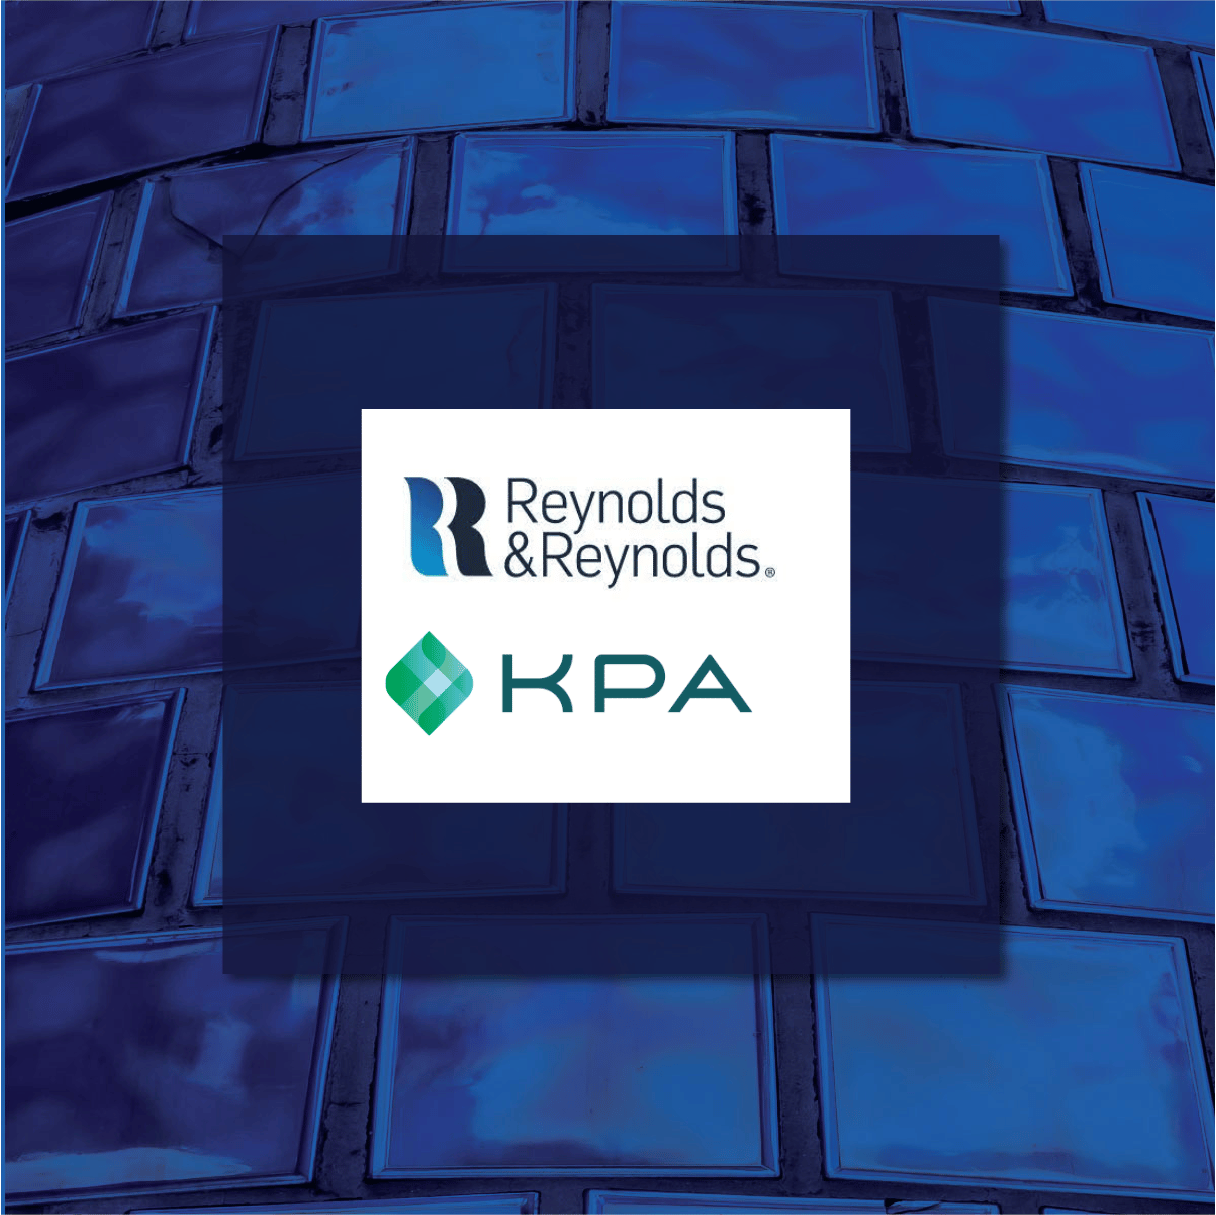 KPA and Reynolds and Renolds announced an F&I partnership